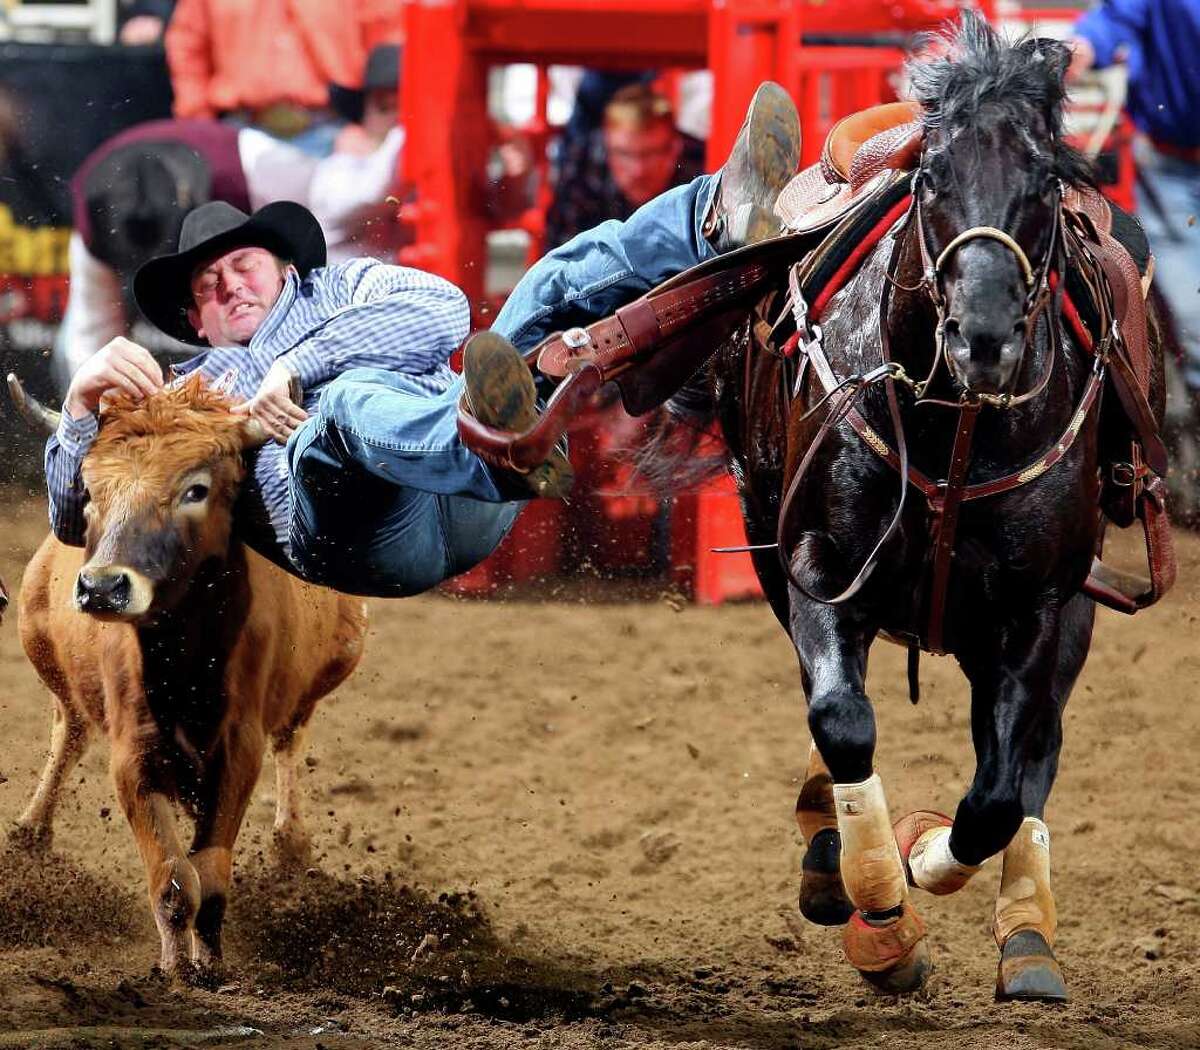 Steer wrestler seizes momentum leading into rodeo finals